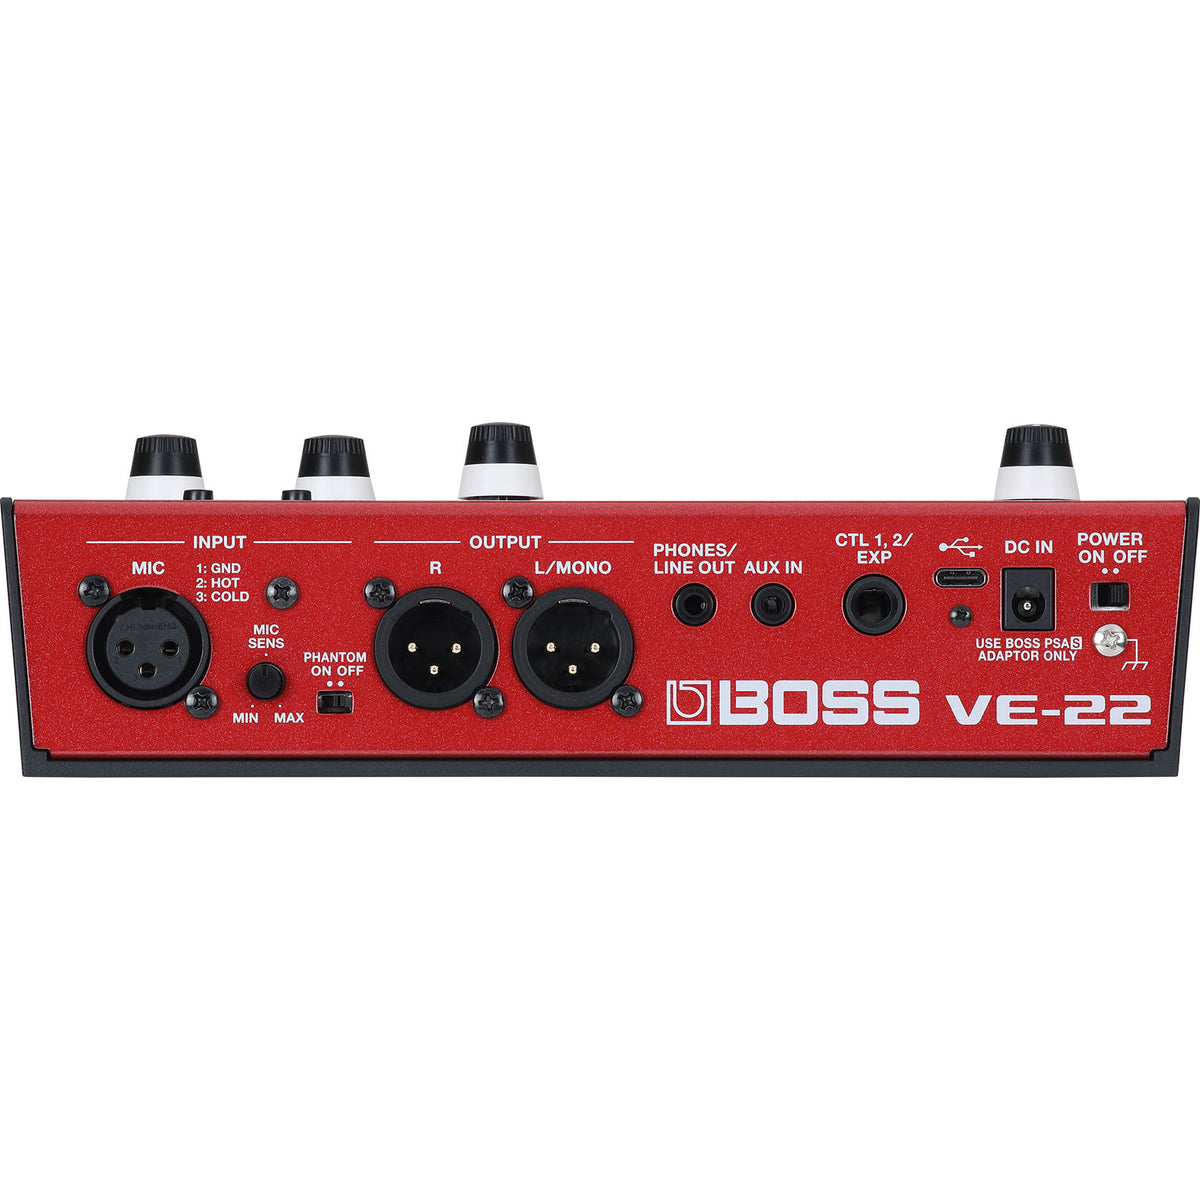 Boss VE-22 Vocal Performer Effects Processor Pedal